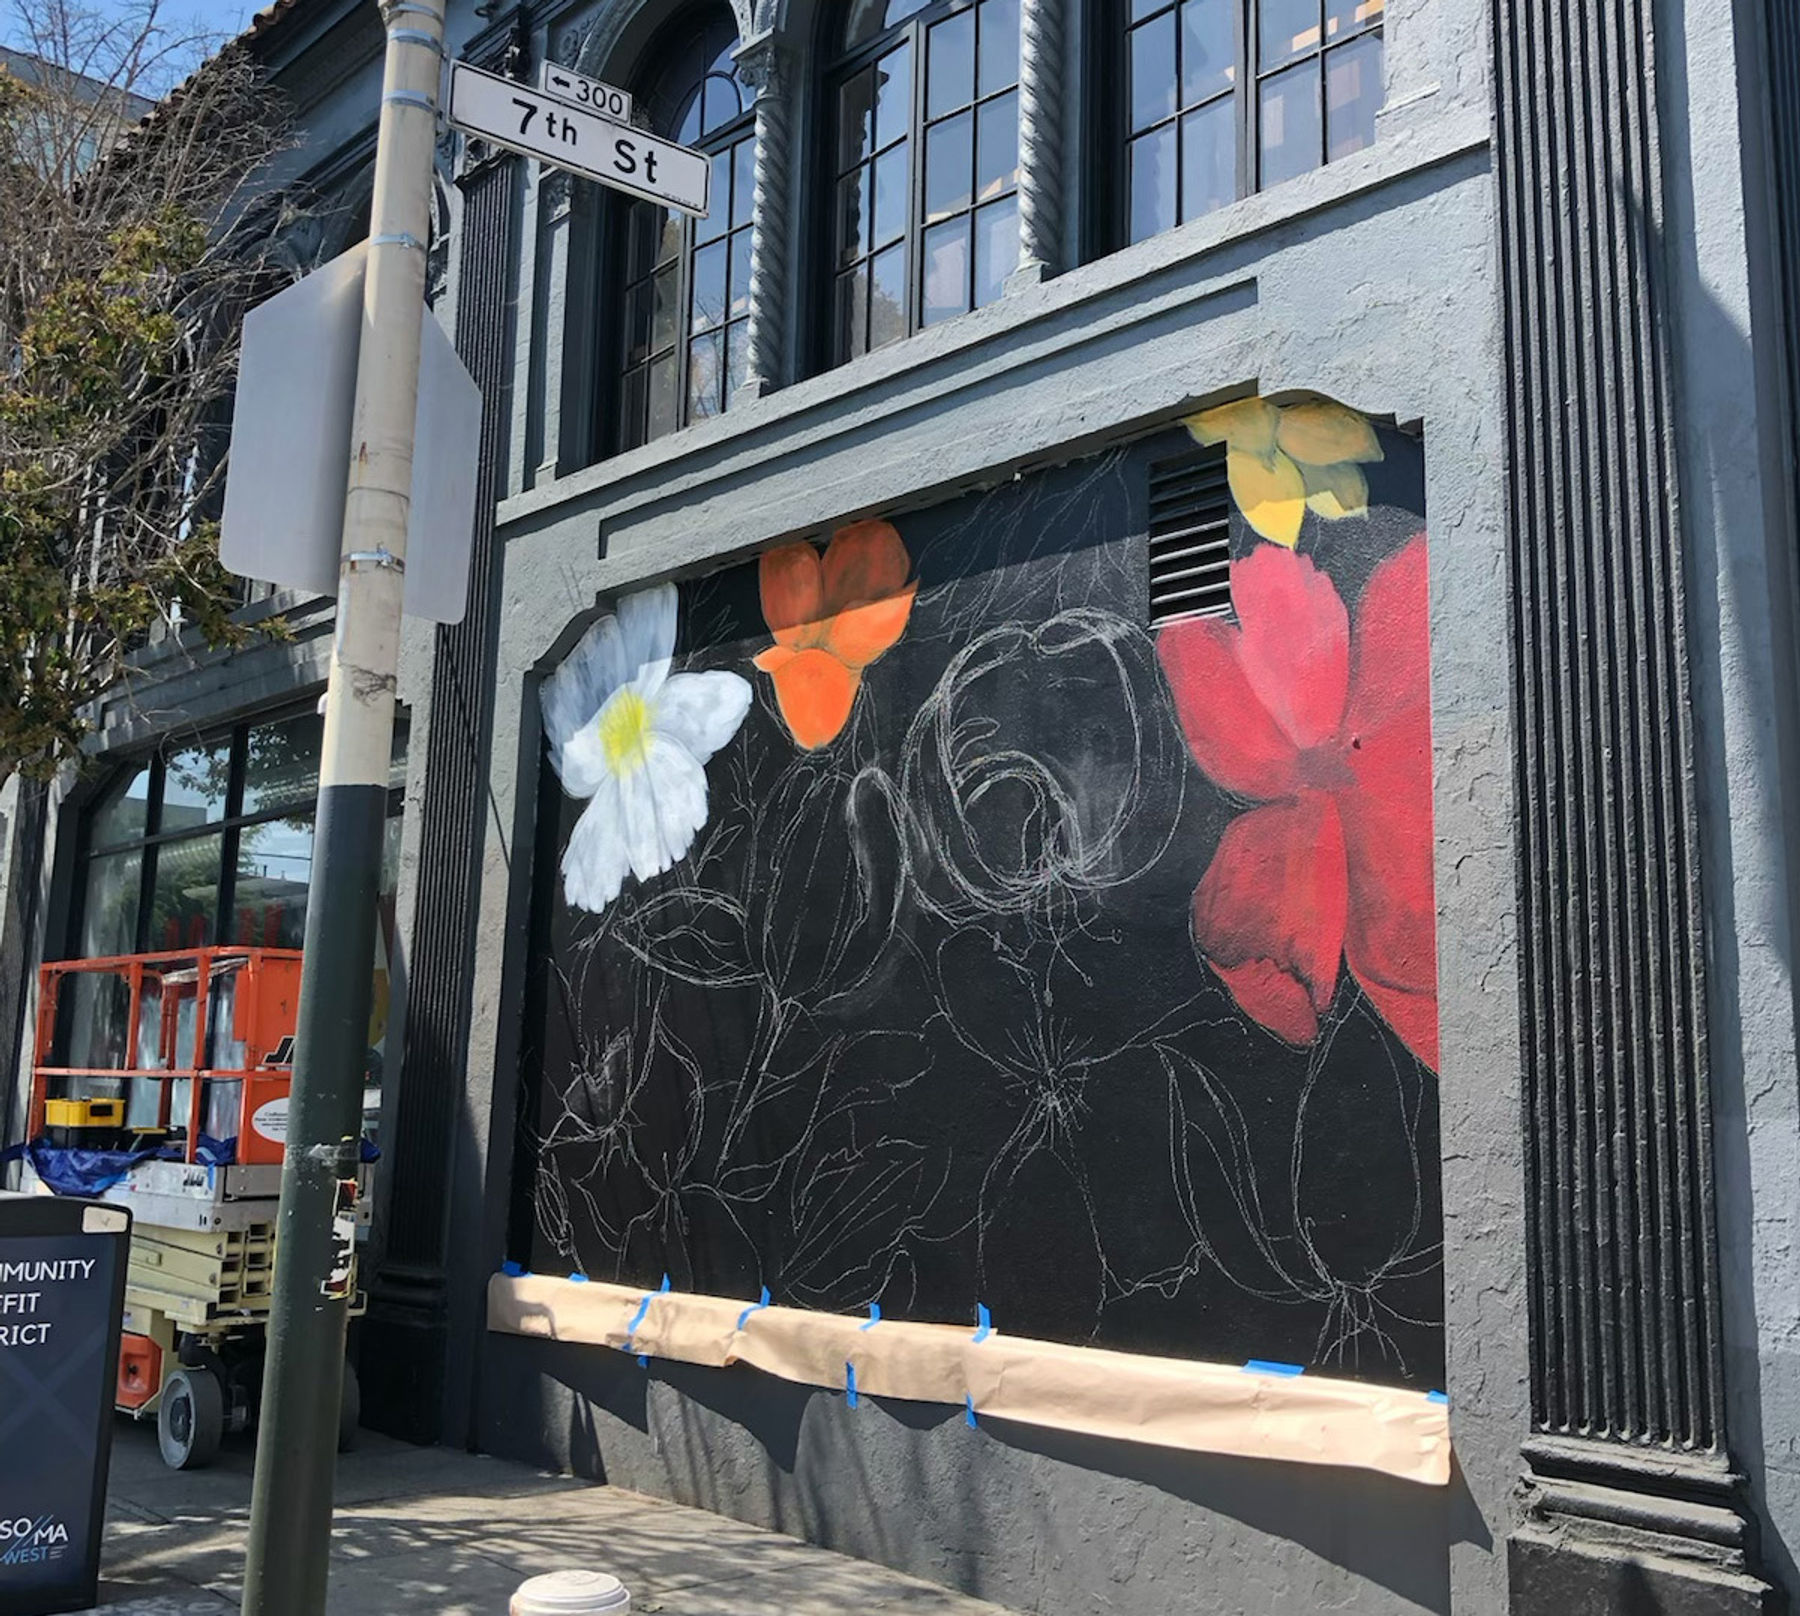 Mural preparation, sketch of flowers in chalk against a black background on a the wall